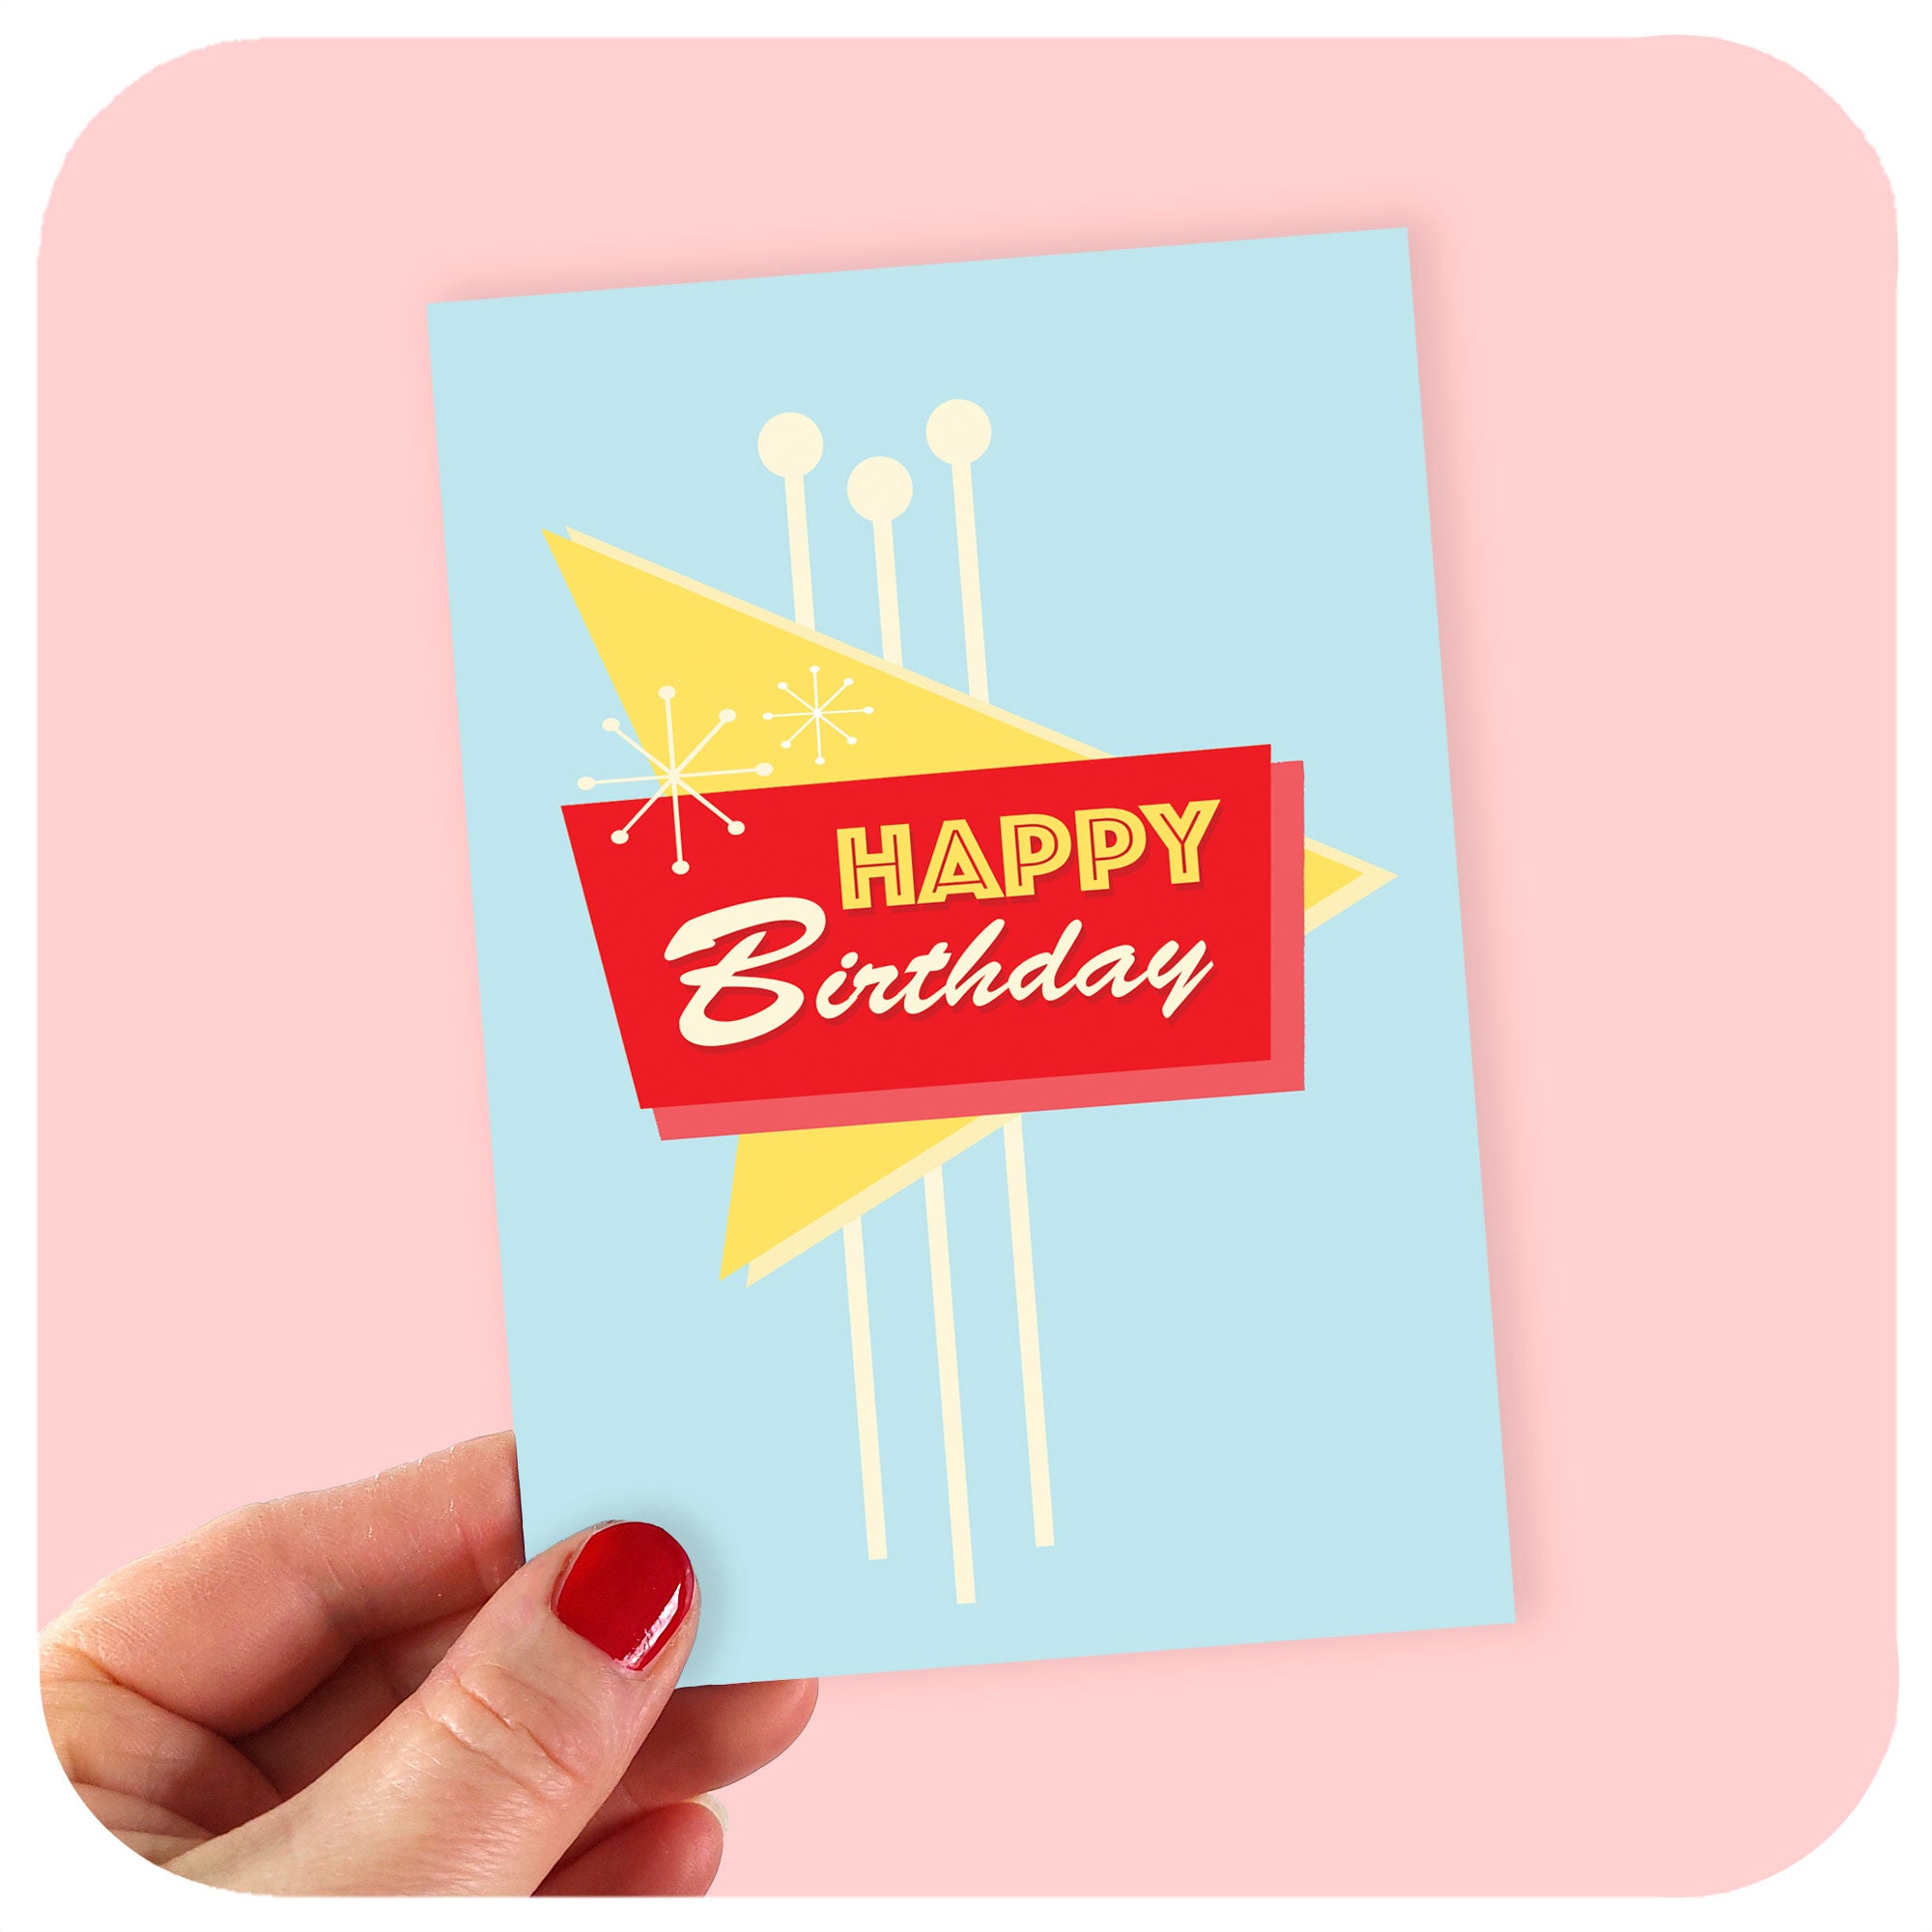 Happy Birthday Card in Vintage Las Vegas Style, held by a hand against a pale pink background | The Inkabilly Emporium